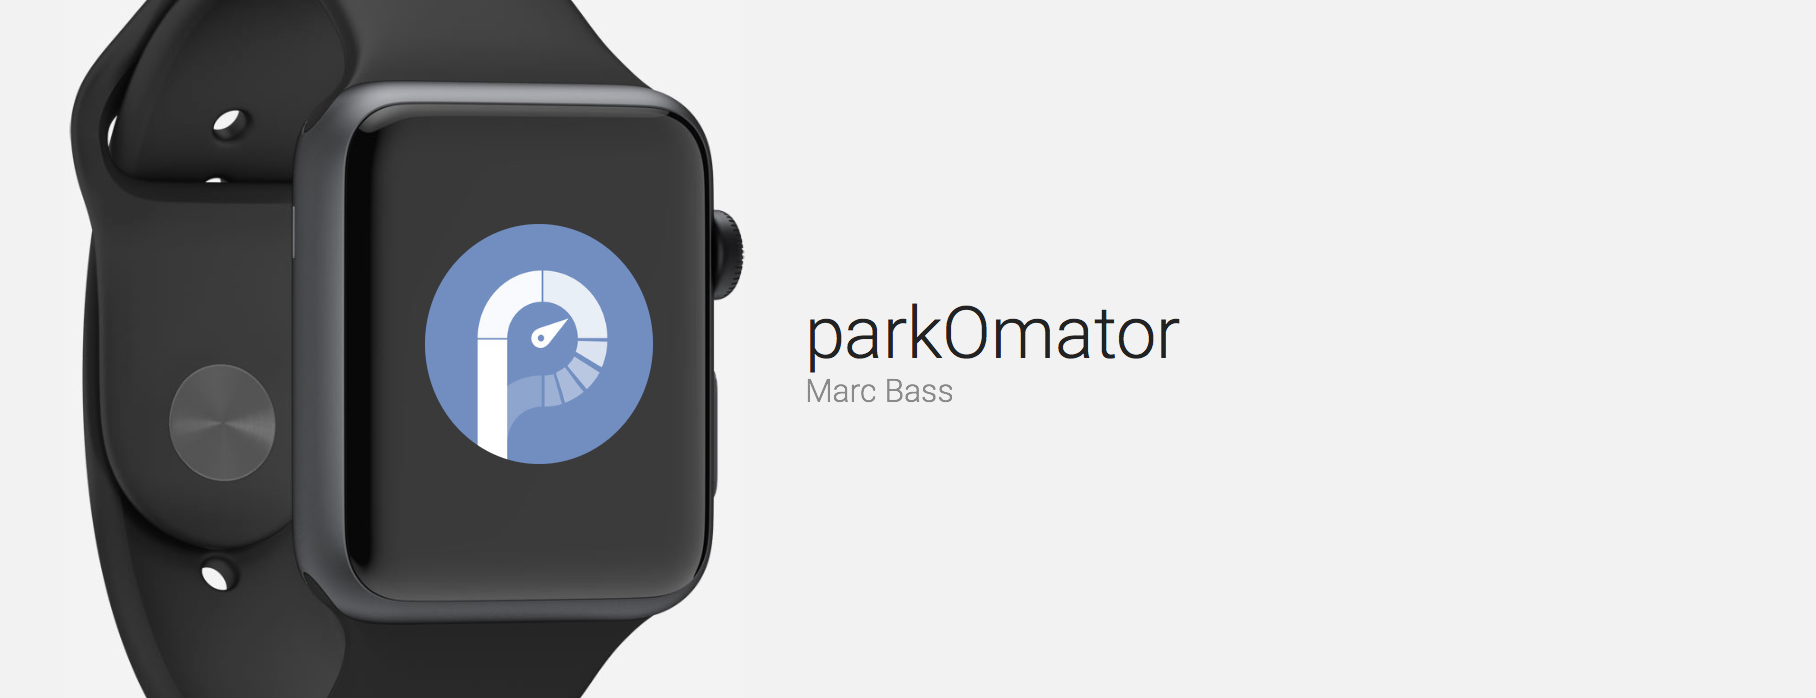 Park your car with ParkOmator and never get ticketed again